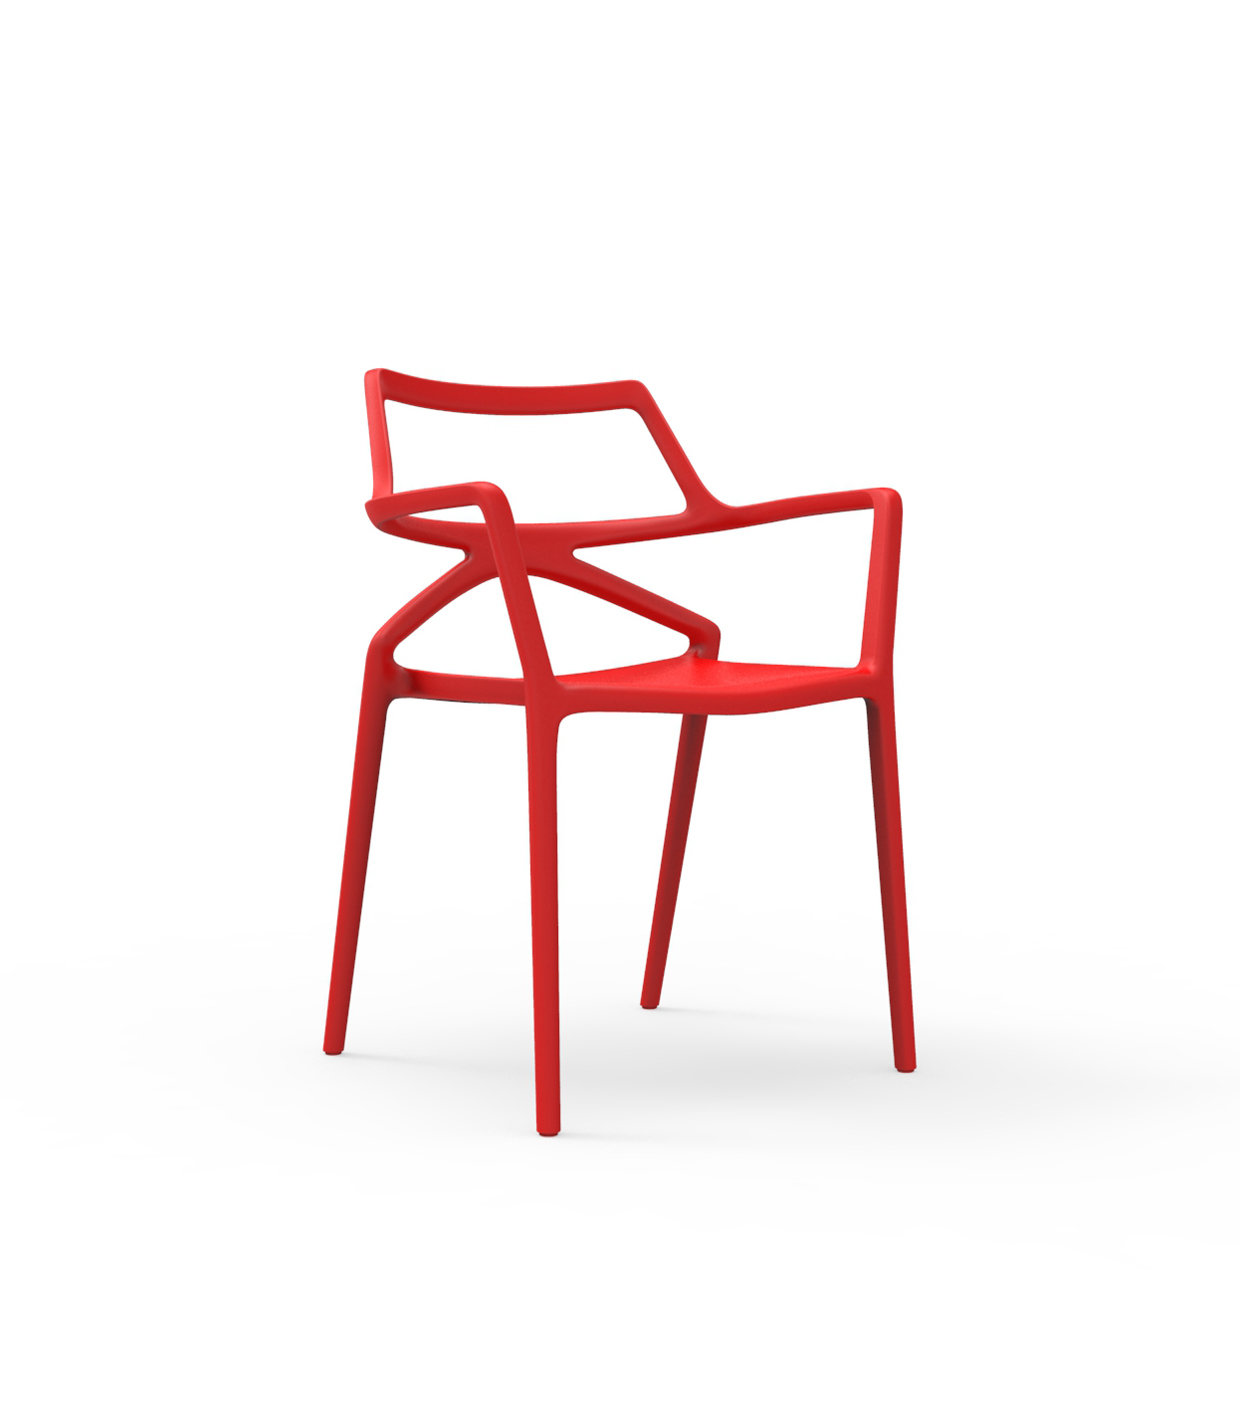 Chaise avec accoudoirs rouge